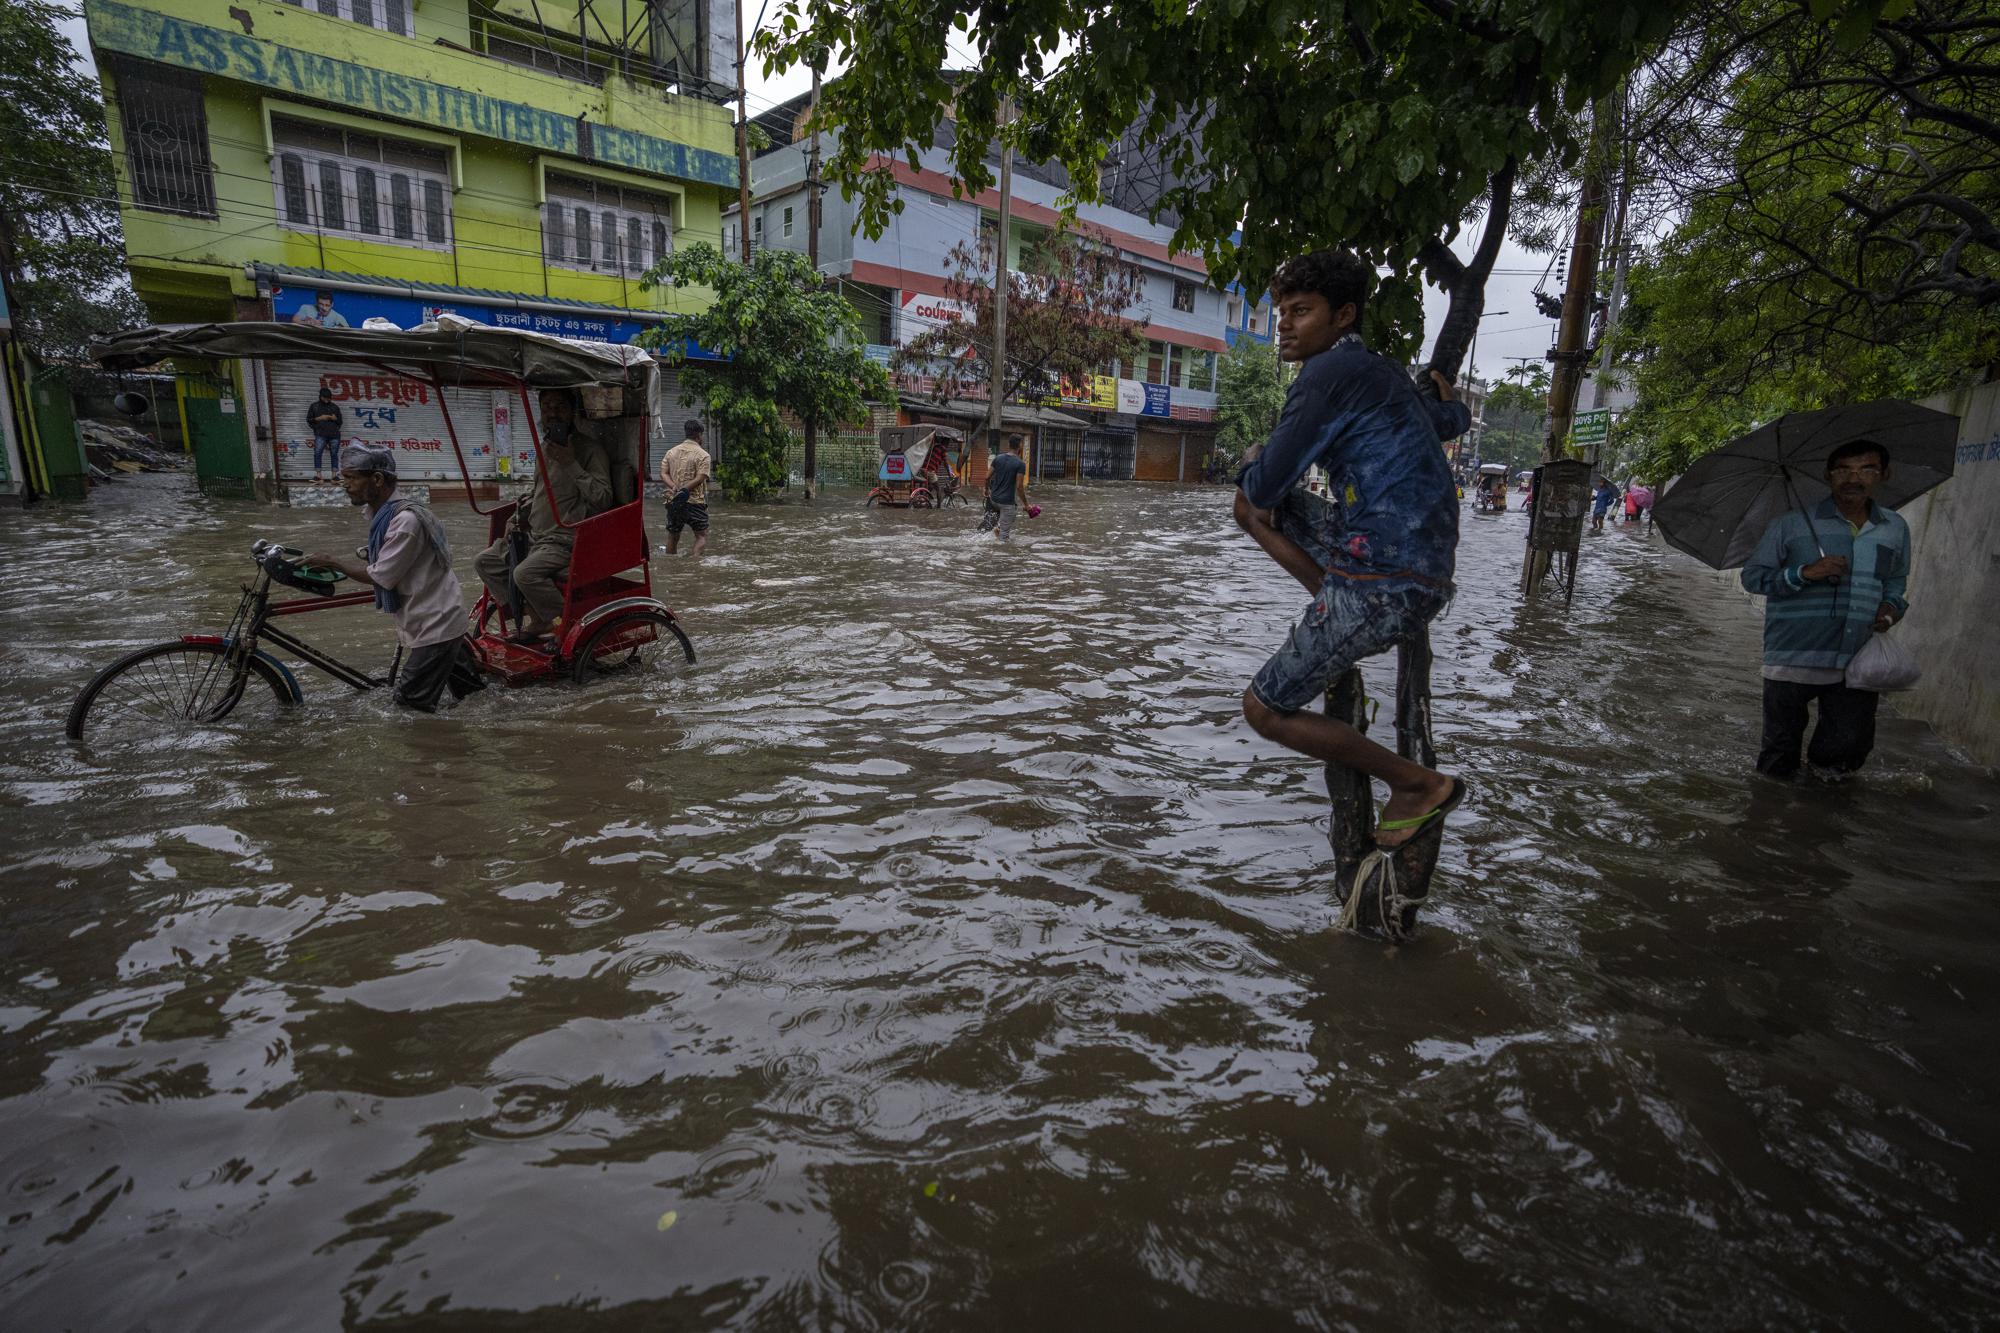 13. People wade through a flooded road after heavy rains in Gauhati, Assam state, India, on June 14, 2022.